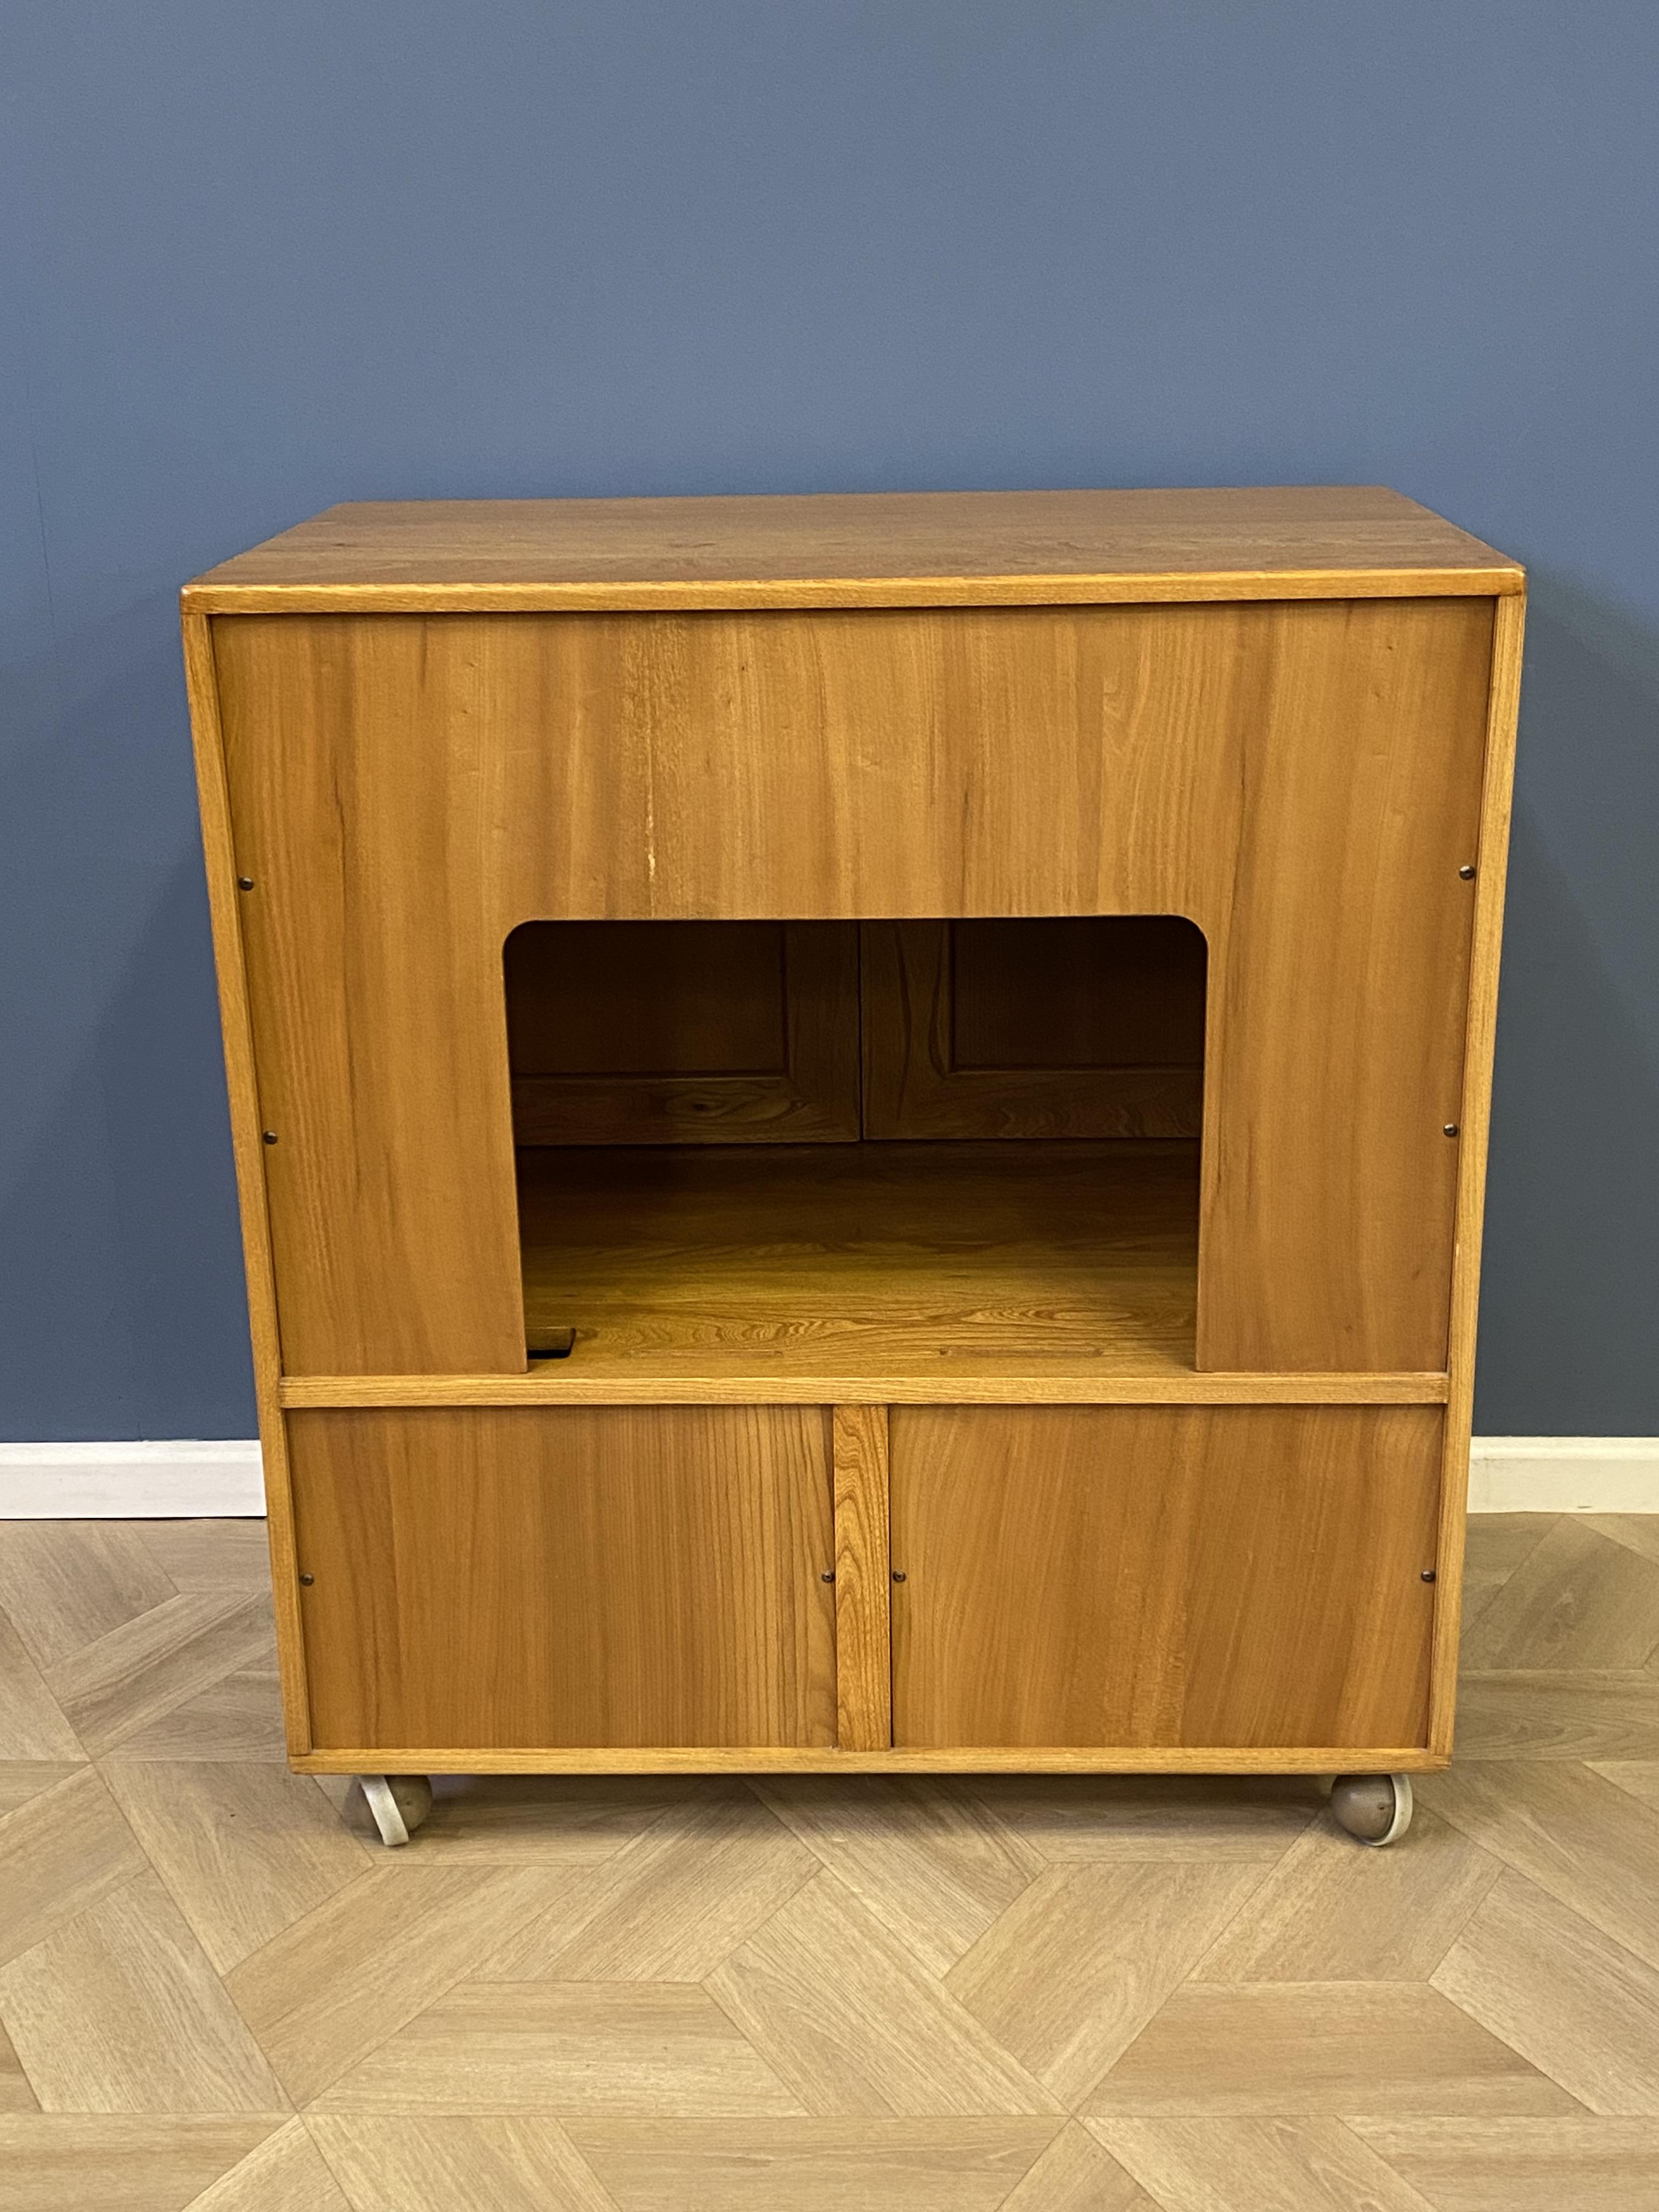 Ercol style television cabinet - Image 5 of 7